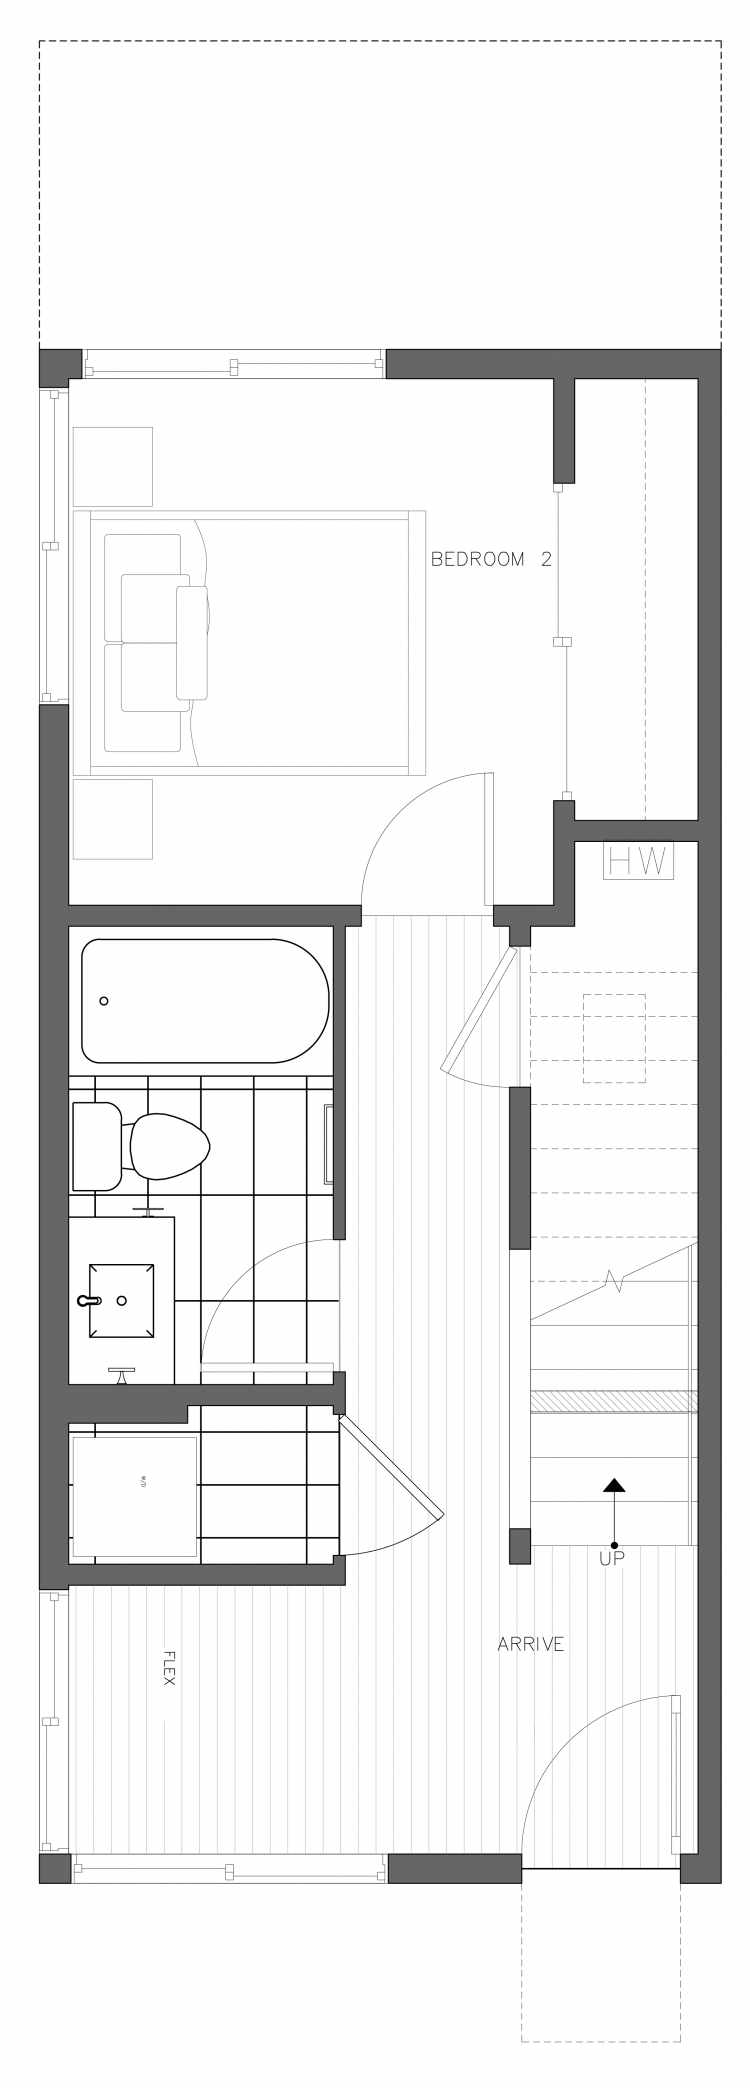 First Floor Plan of 3418A 15th Ave W, One of the Arlo Townhomes in North Queen Anne